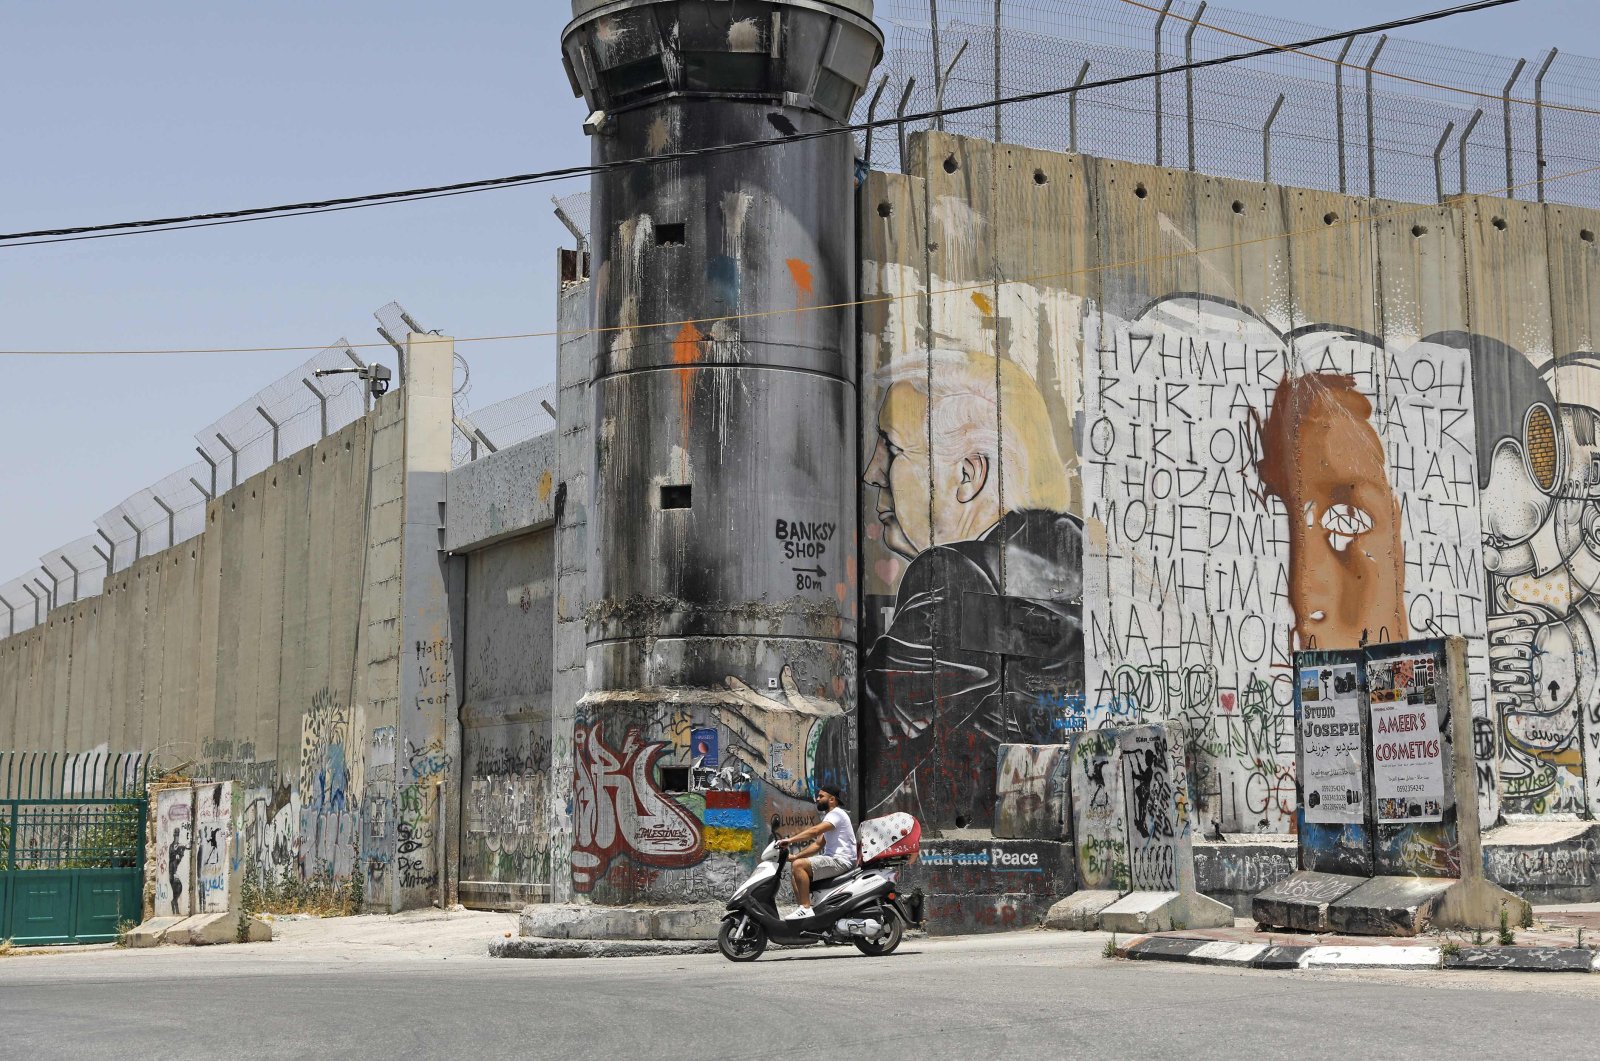 A Palestinian man rides his motorcycle past a mural painting of US President Donald Trump on Israel's controversial separation barrier in the West Bank city of Bethlehem on June 8, 2020. (AFP Photo)